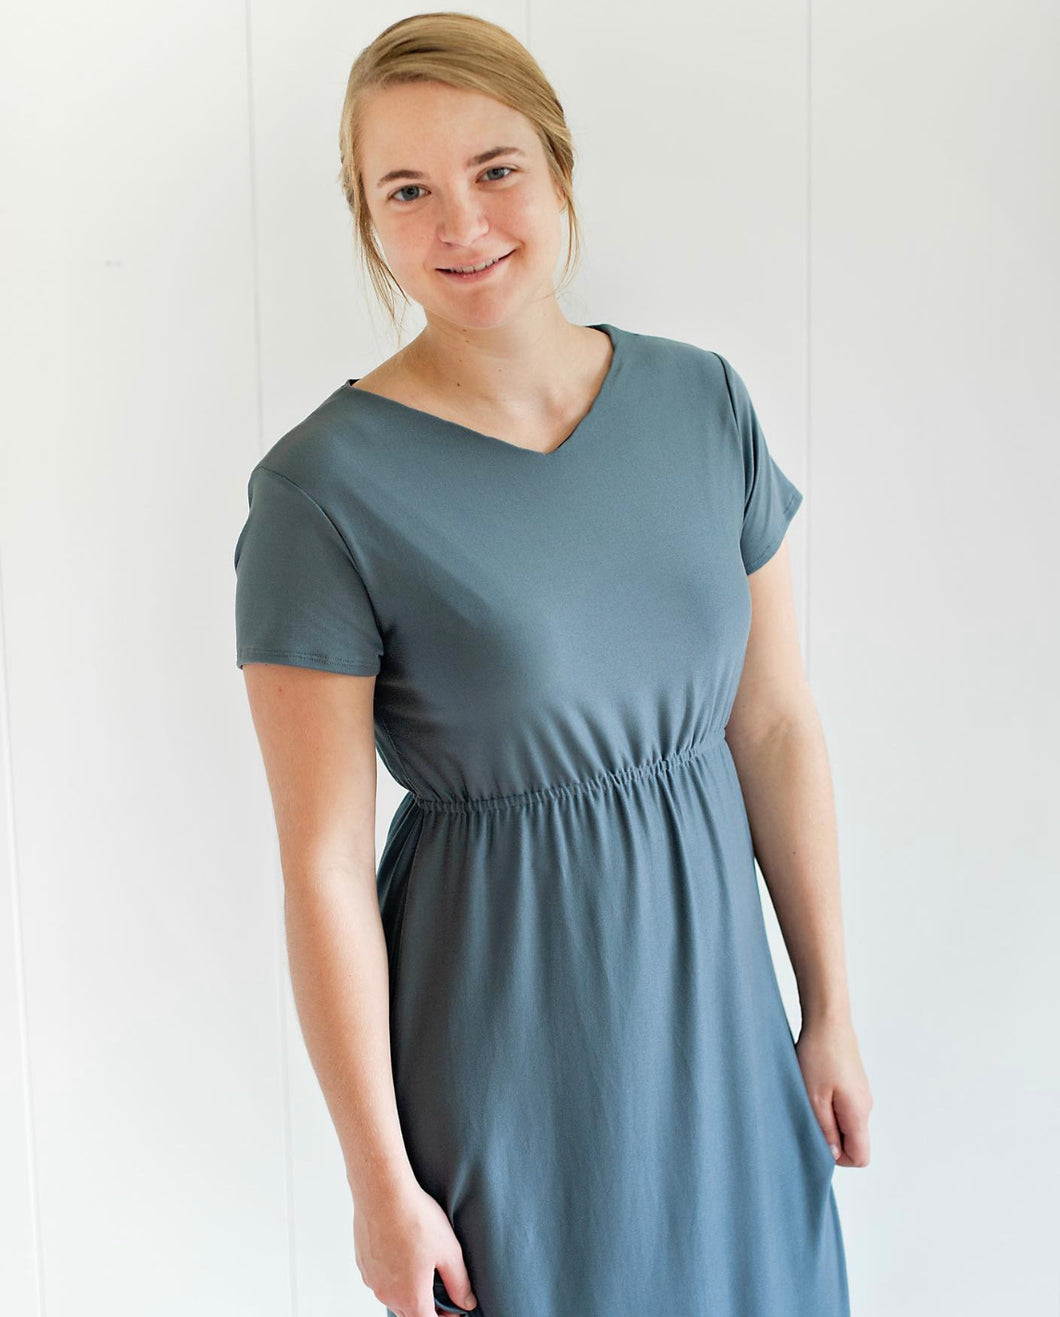 Add v-neck to your dress